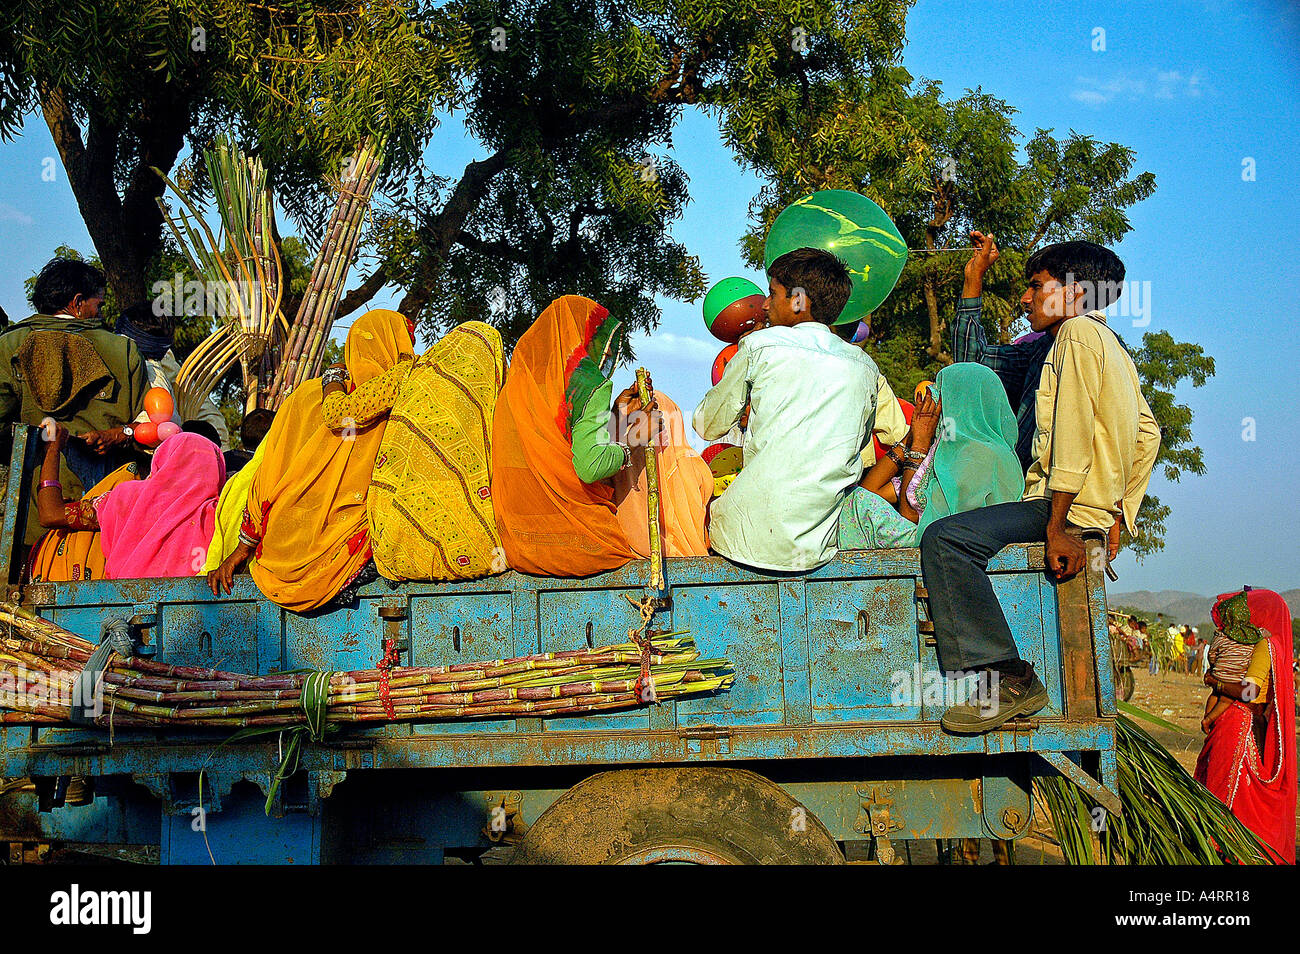 SUB98570 villagers on a tractor going to the fair Pushkar Rajasthan India Stock Photo